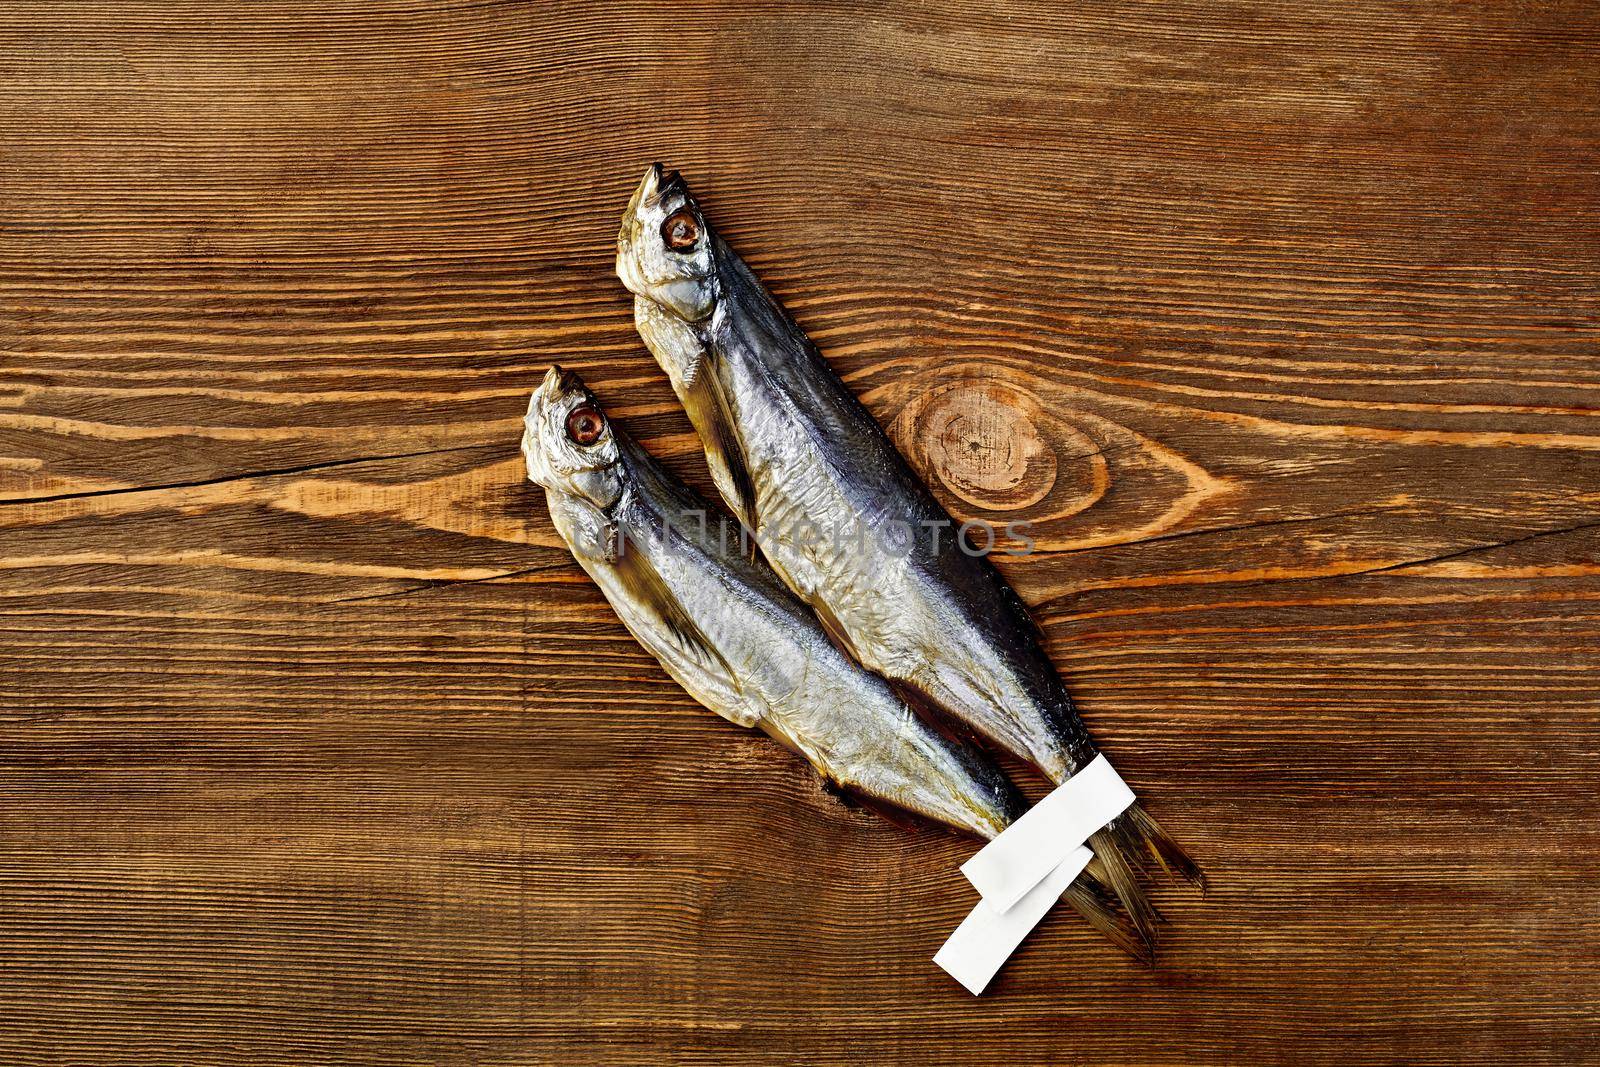 Two salted sun-dried sabrefish with paper labels on tails lying on brown wooden surface, top view with copyspace